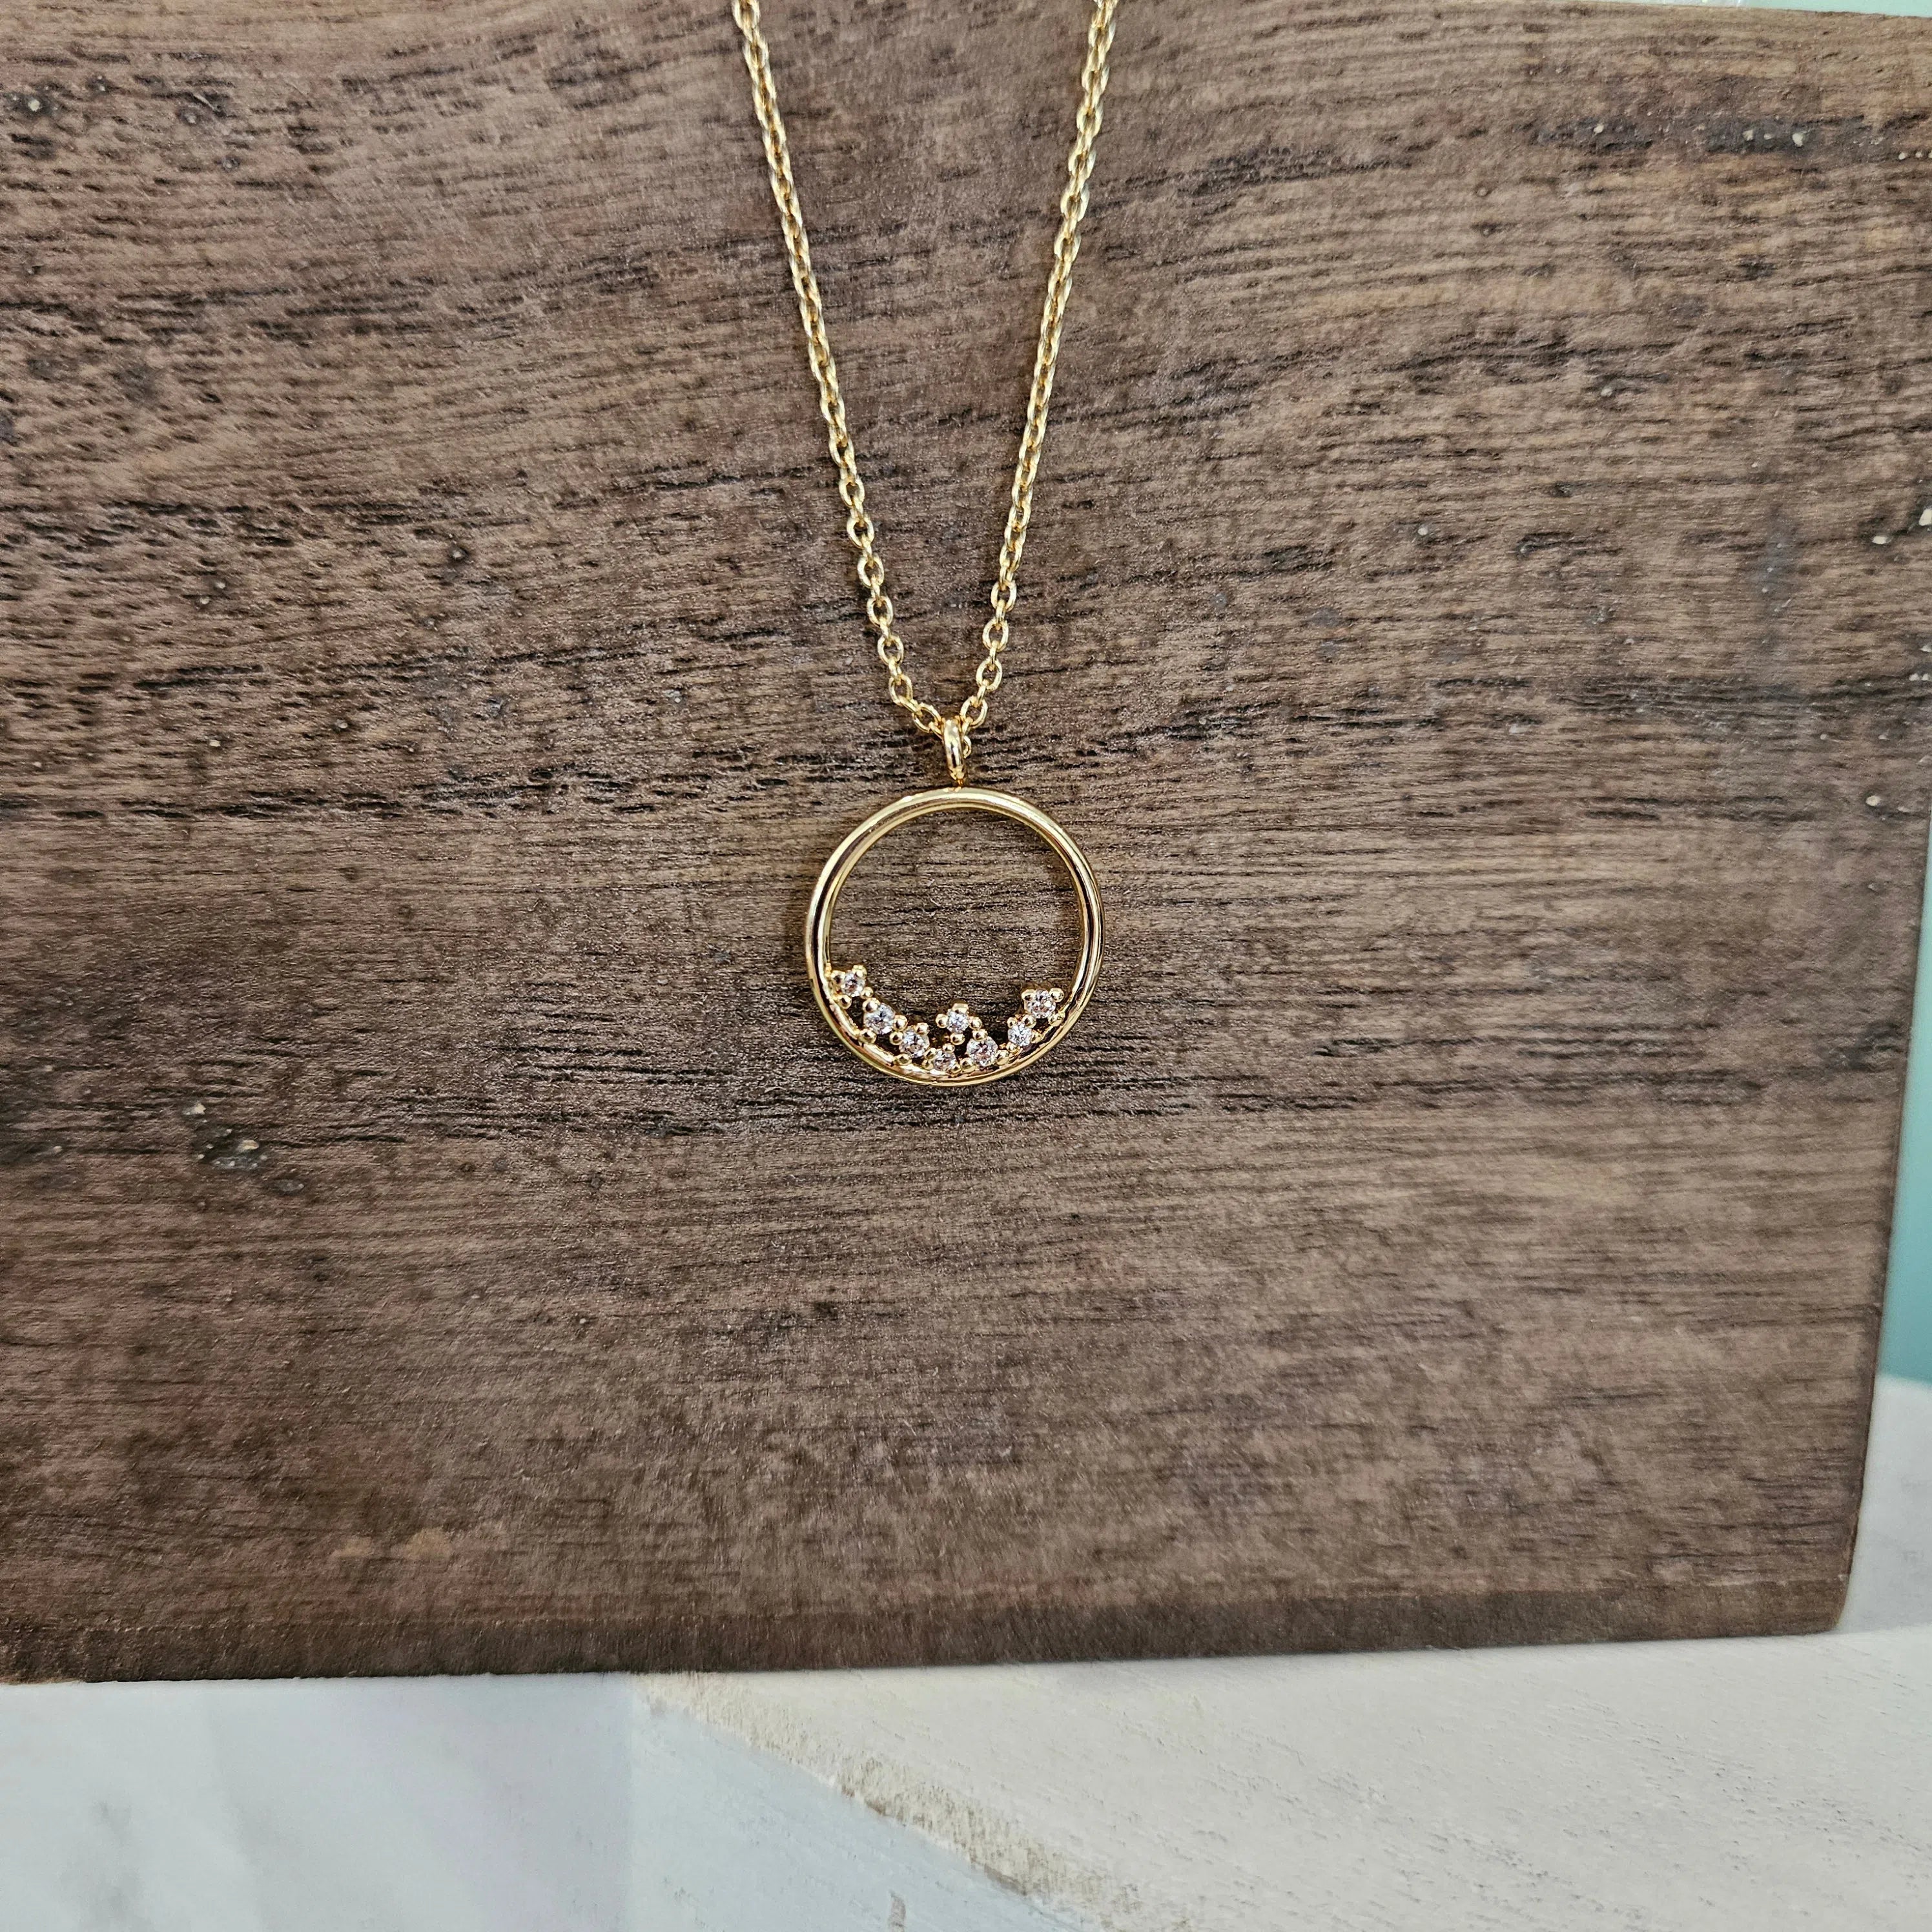 Shop Dainty Astral Circle Necklace-Necklaces at Ruby Joy Boutique, a Women's Clothing Store in Pickerington, Ohio